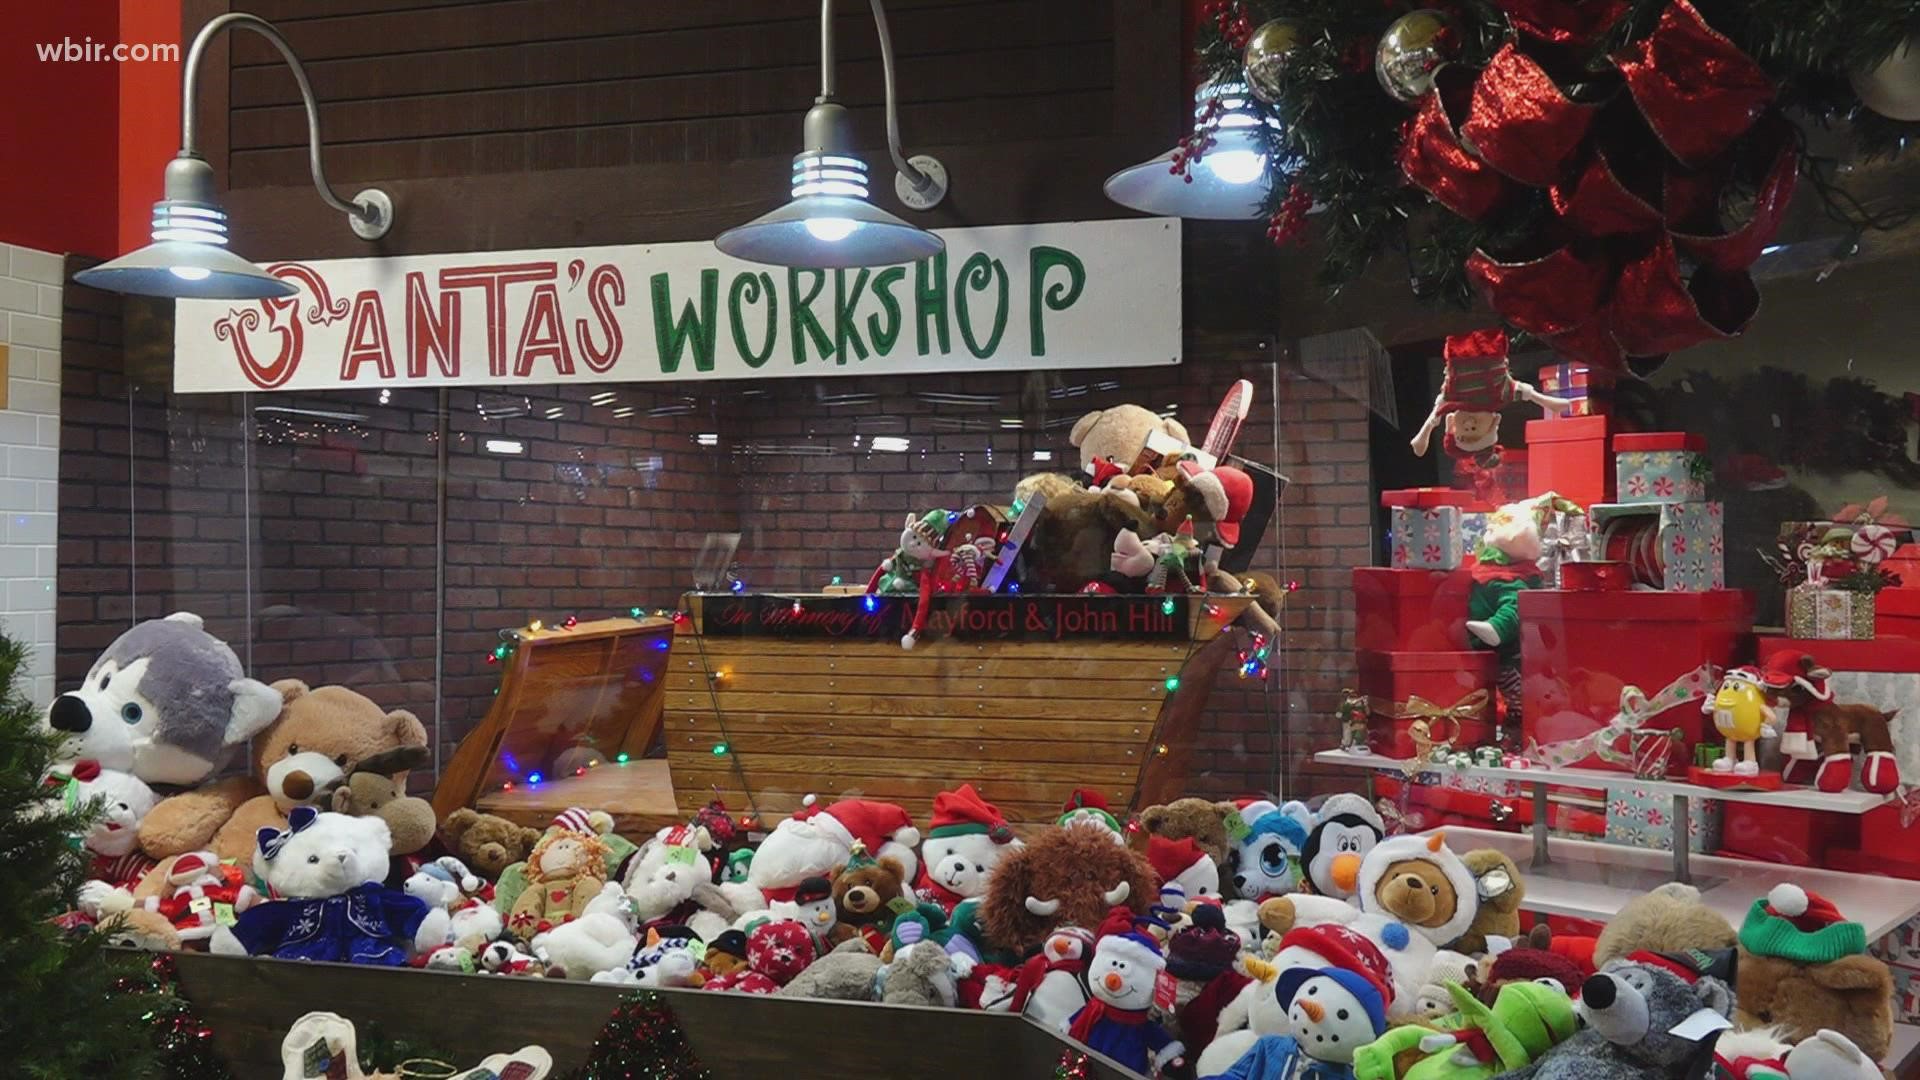 The charity transformed its 20,000-square-foot space into a Christmas store. It's something they do every year, but said this year it's extra special.